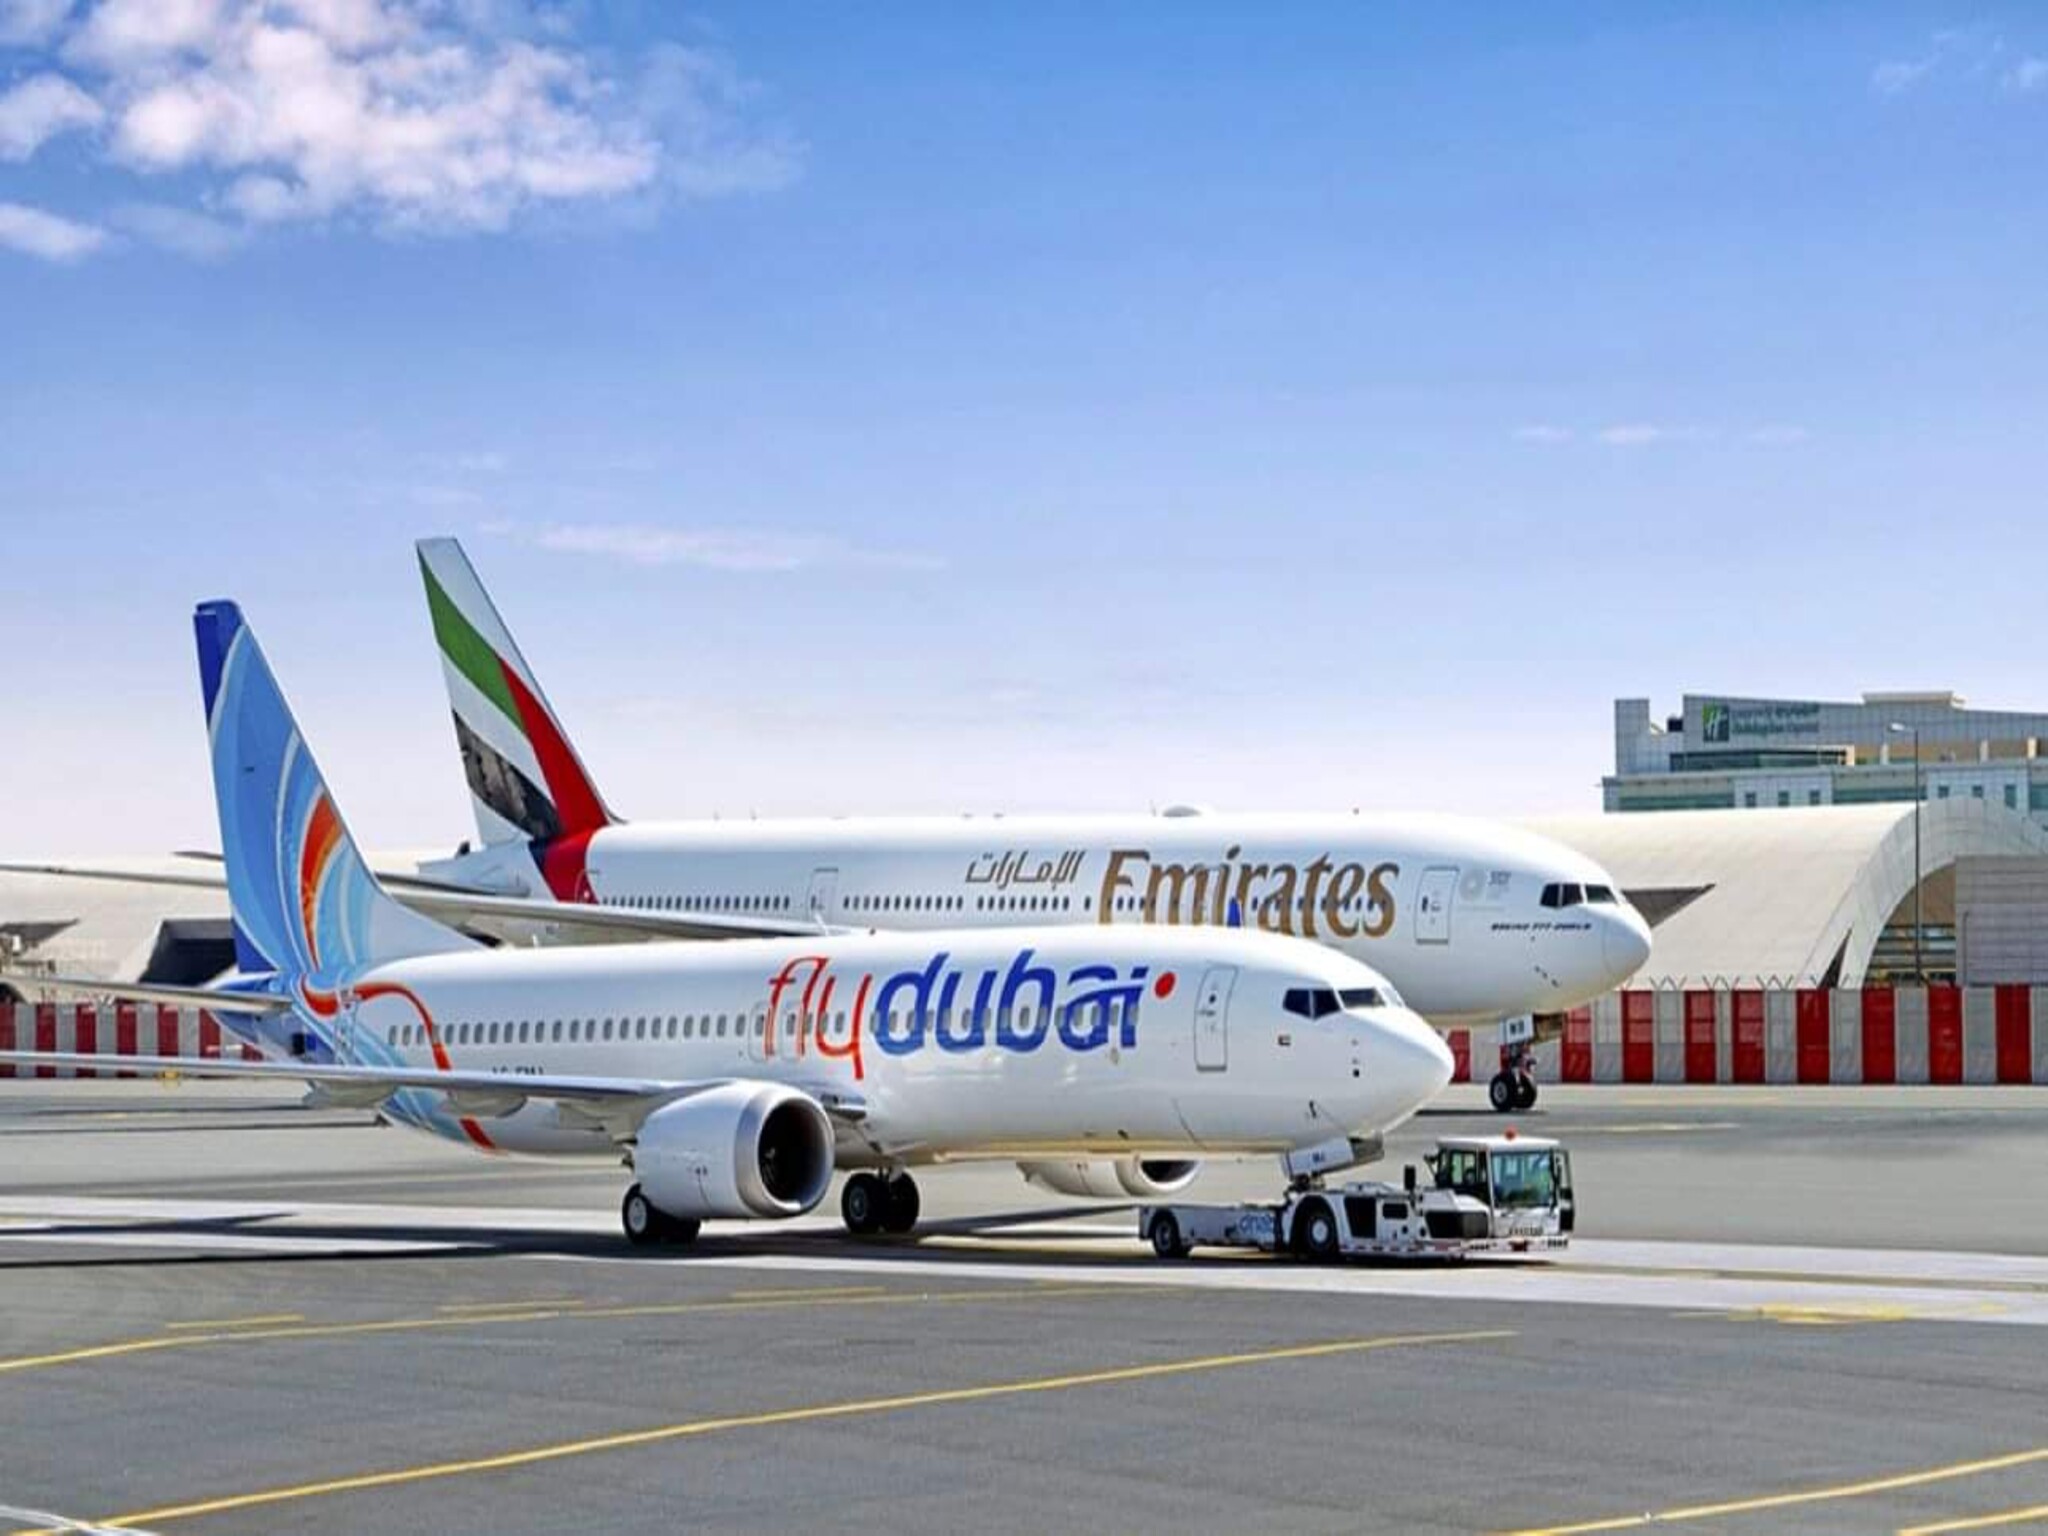 A statement from Emirates Airlines and Flydubai regarding their international flights